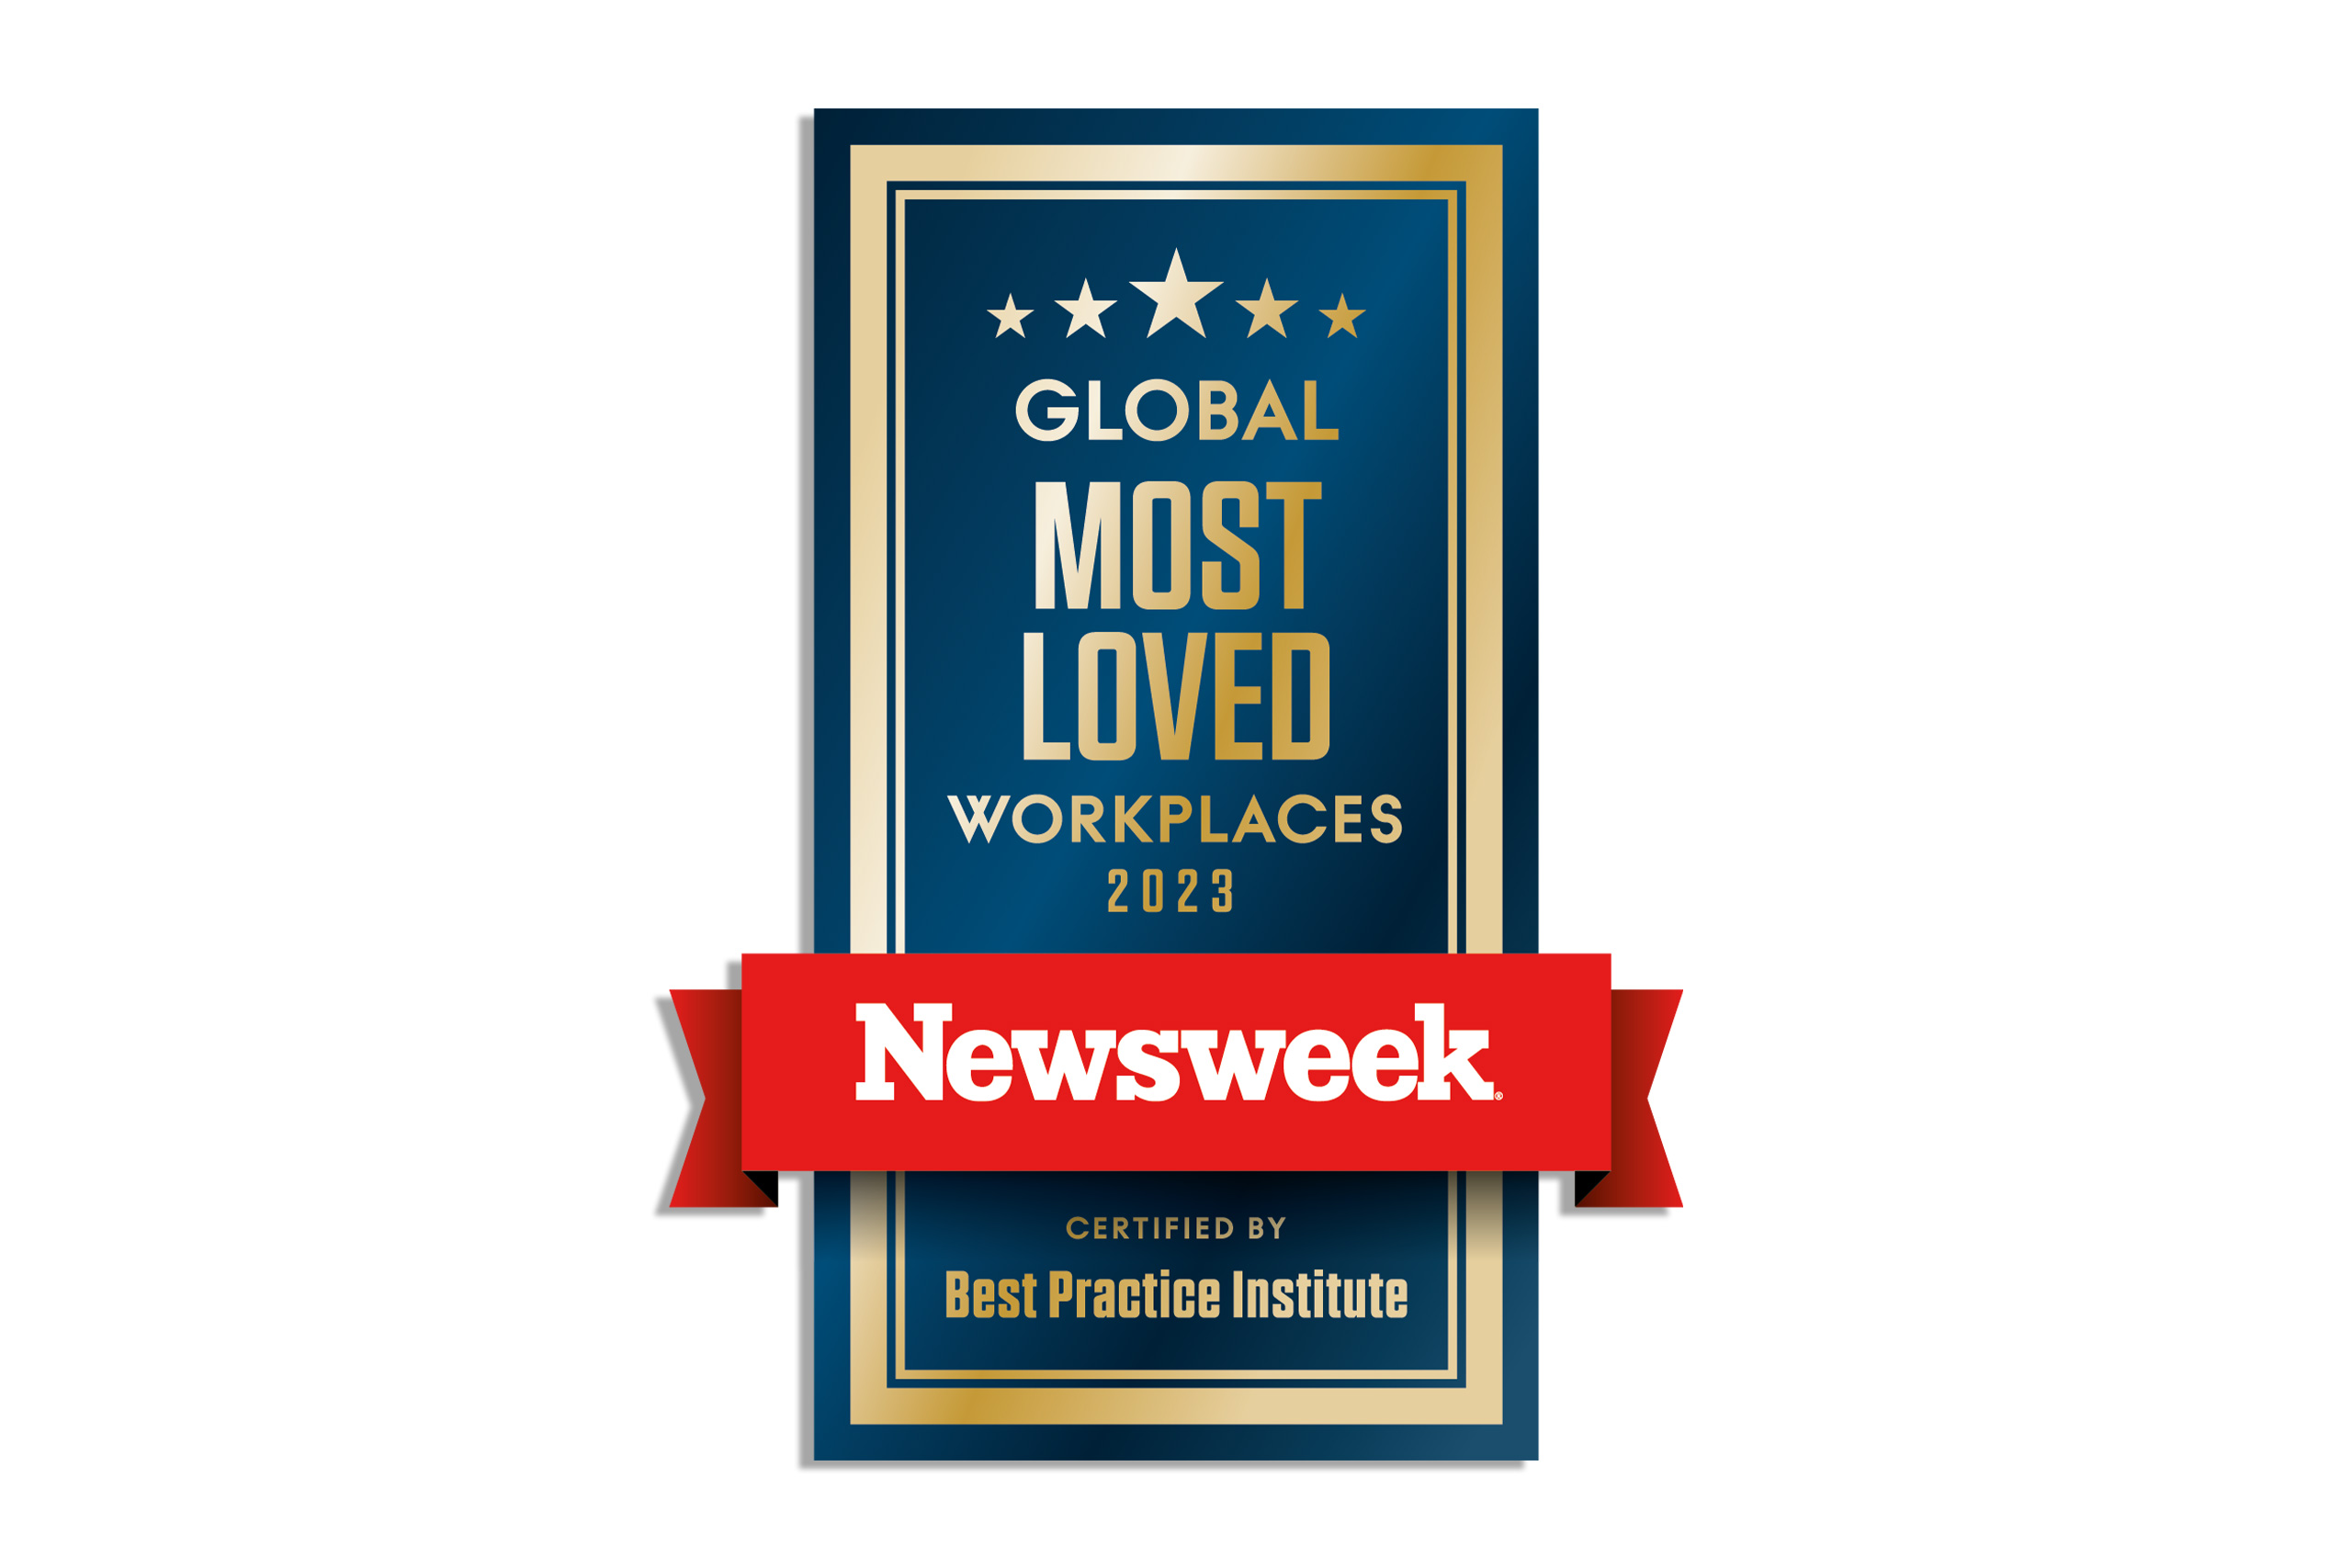 Greif Named in Top 100 GLOBAL MOST LOVED WORKPLACES